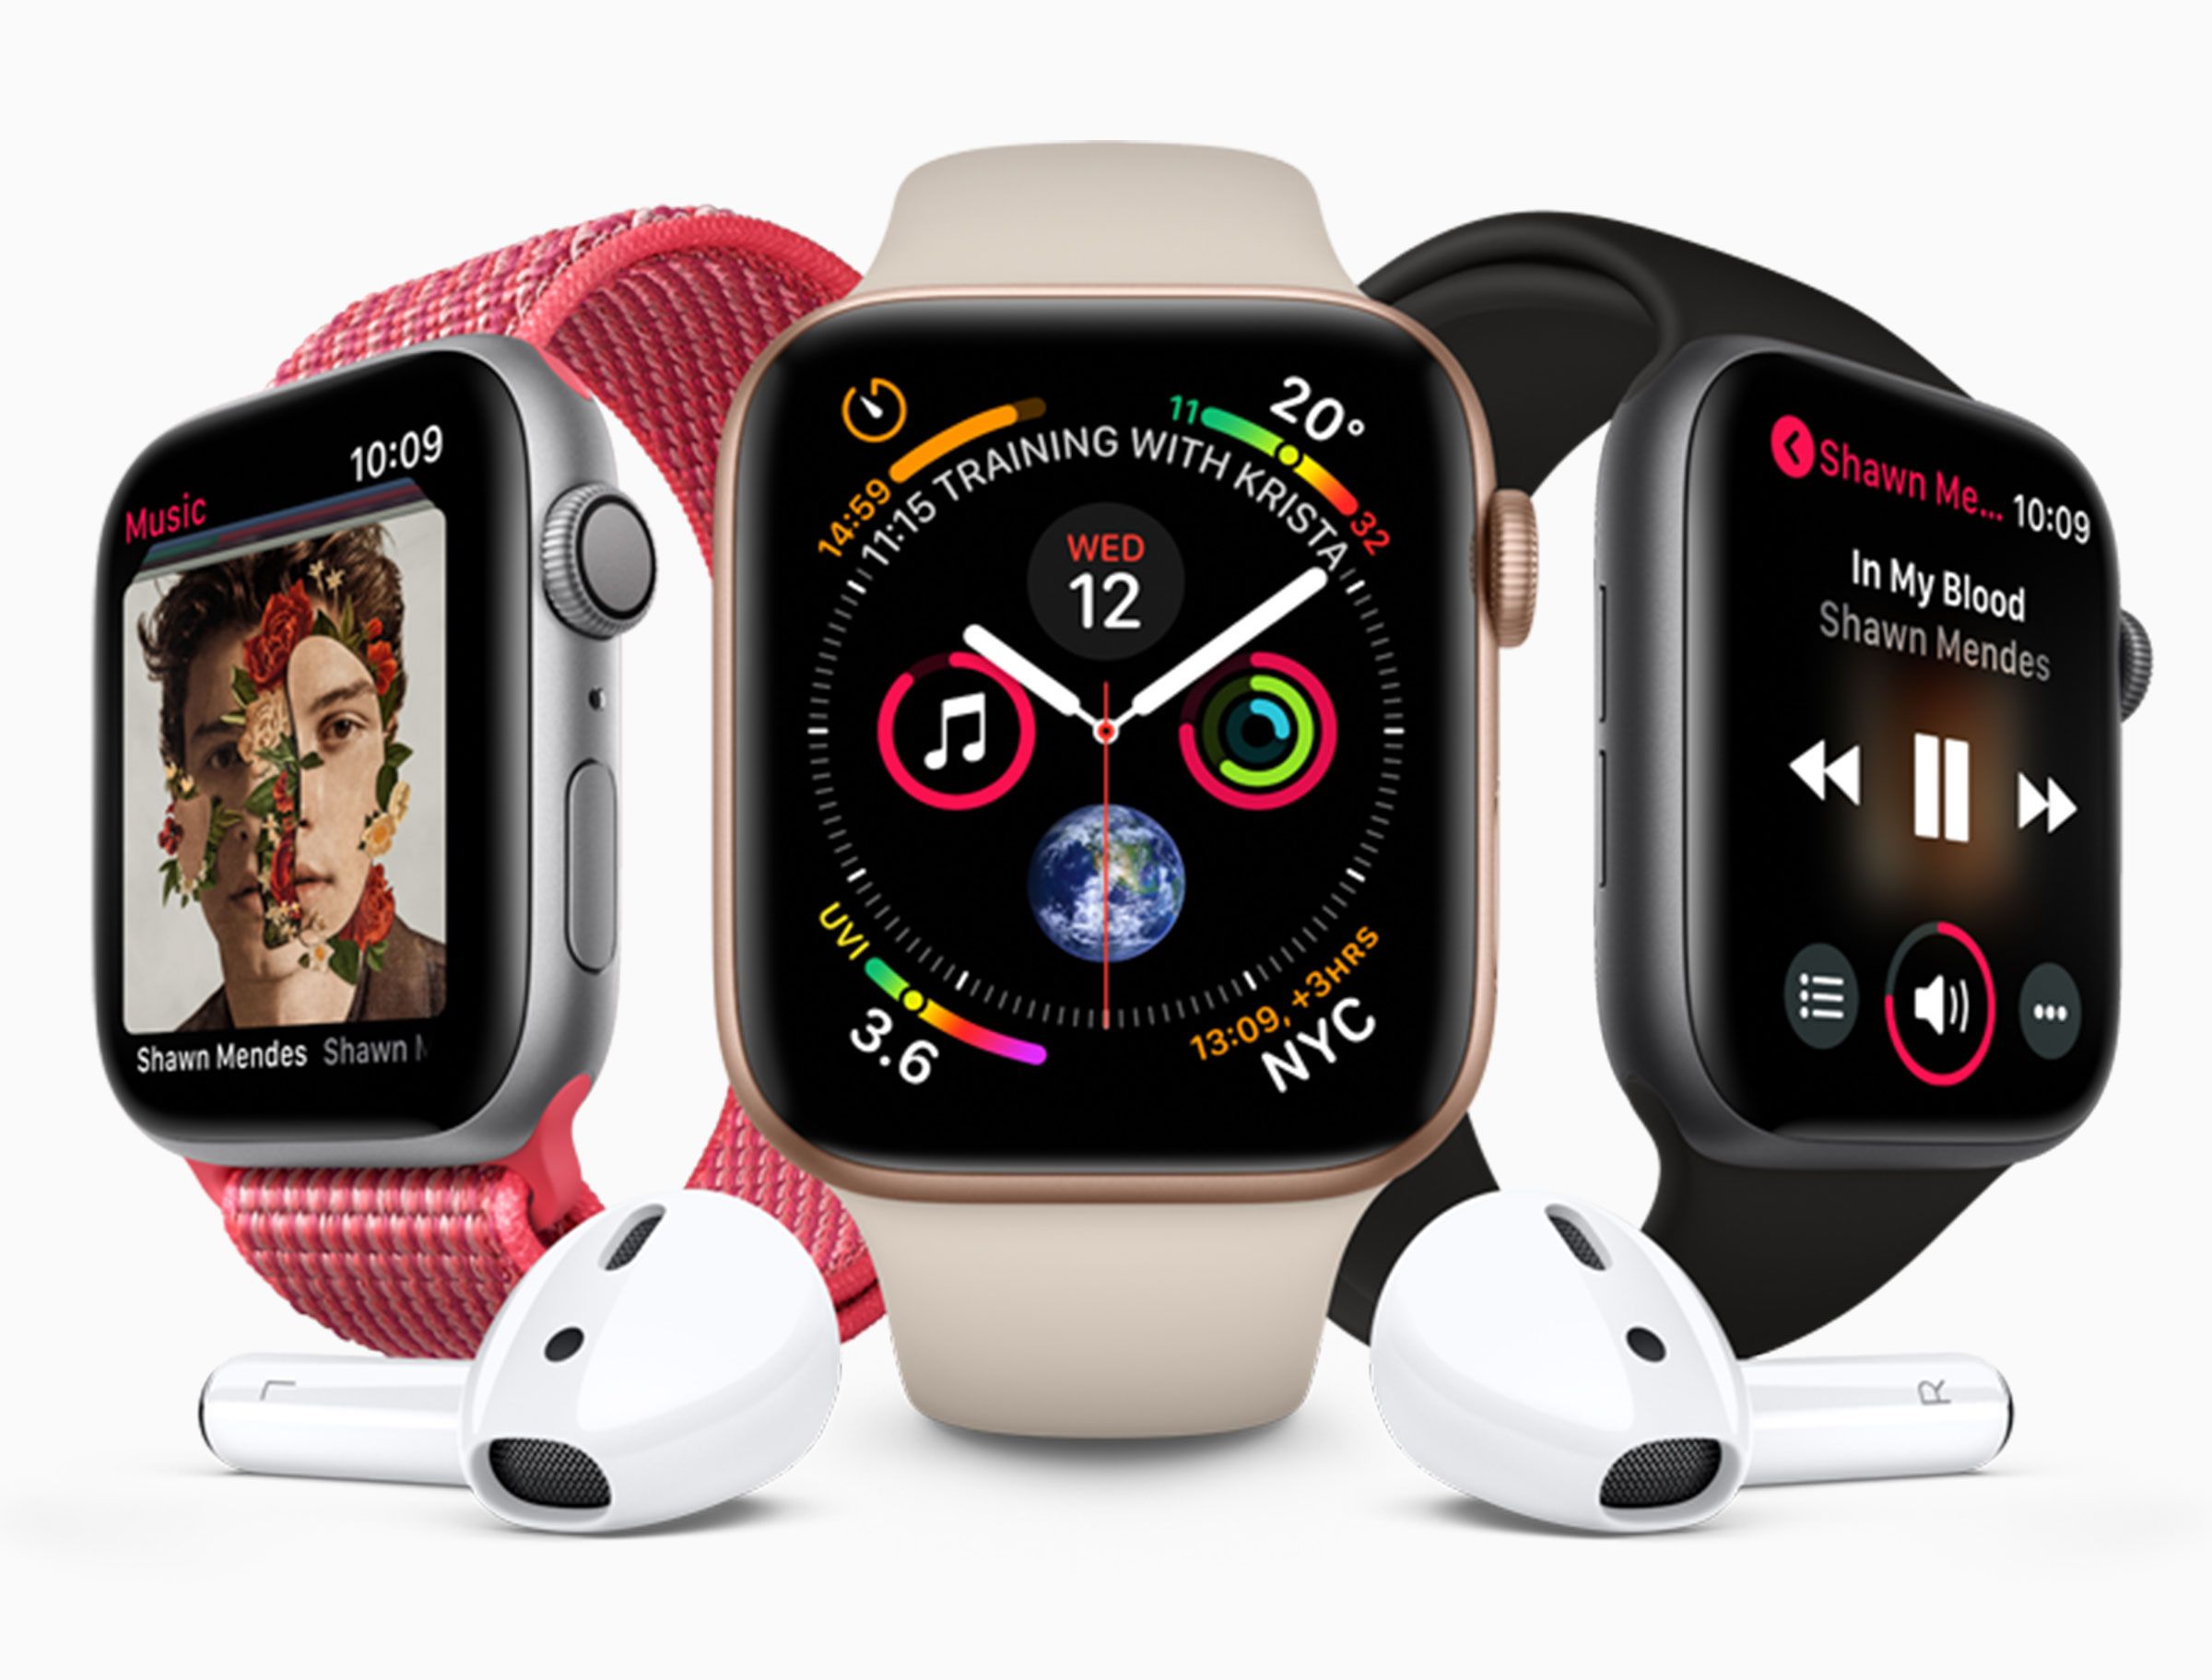 About Apple Watch